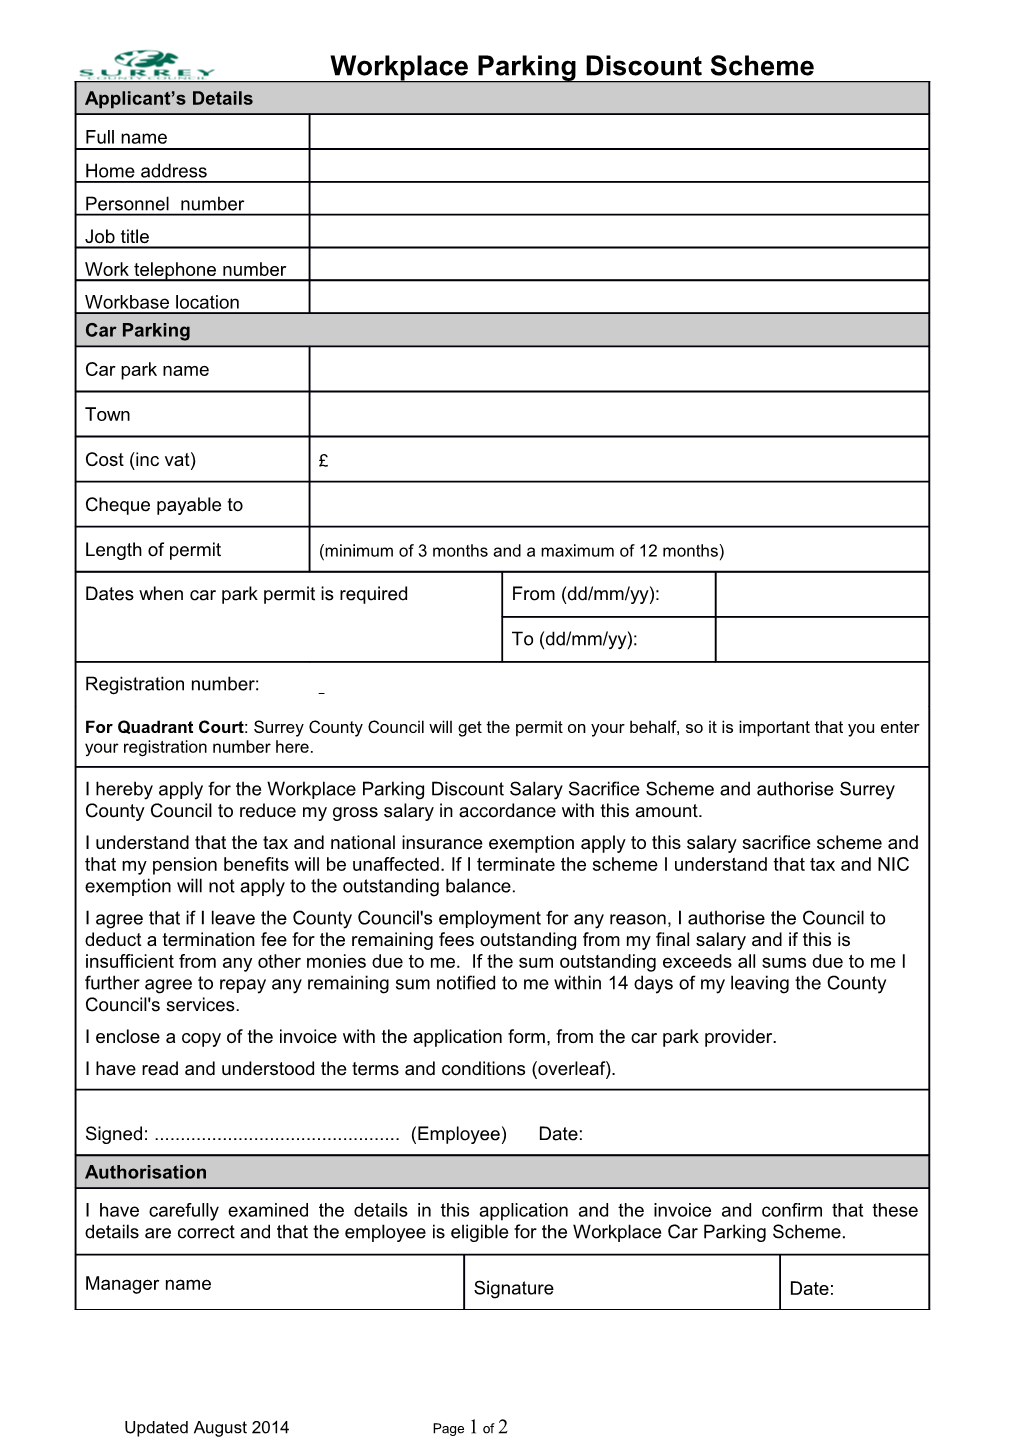 Workplace Parking Application Form